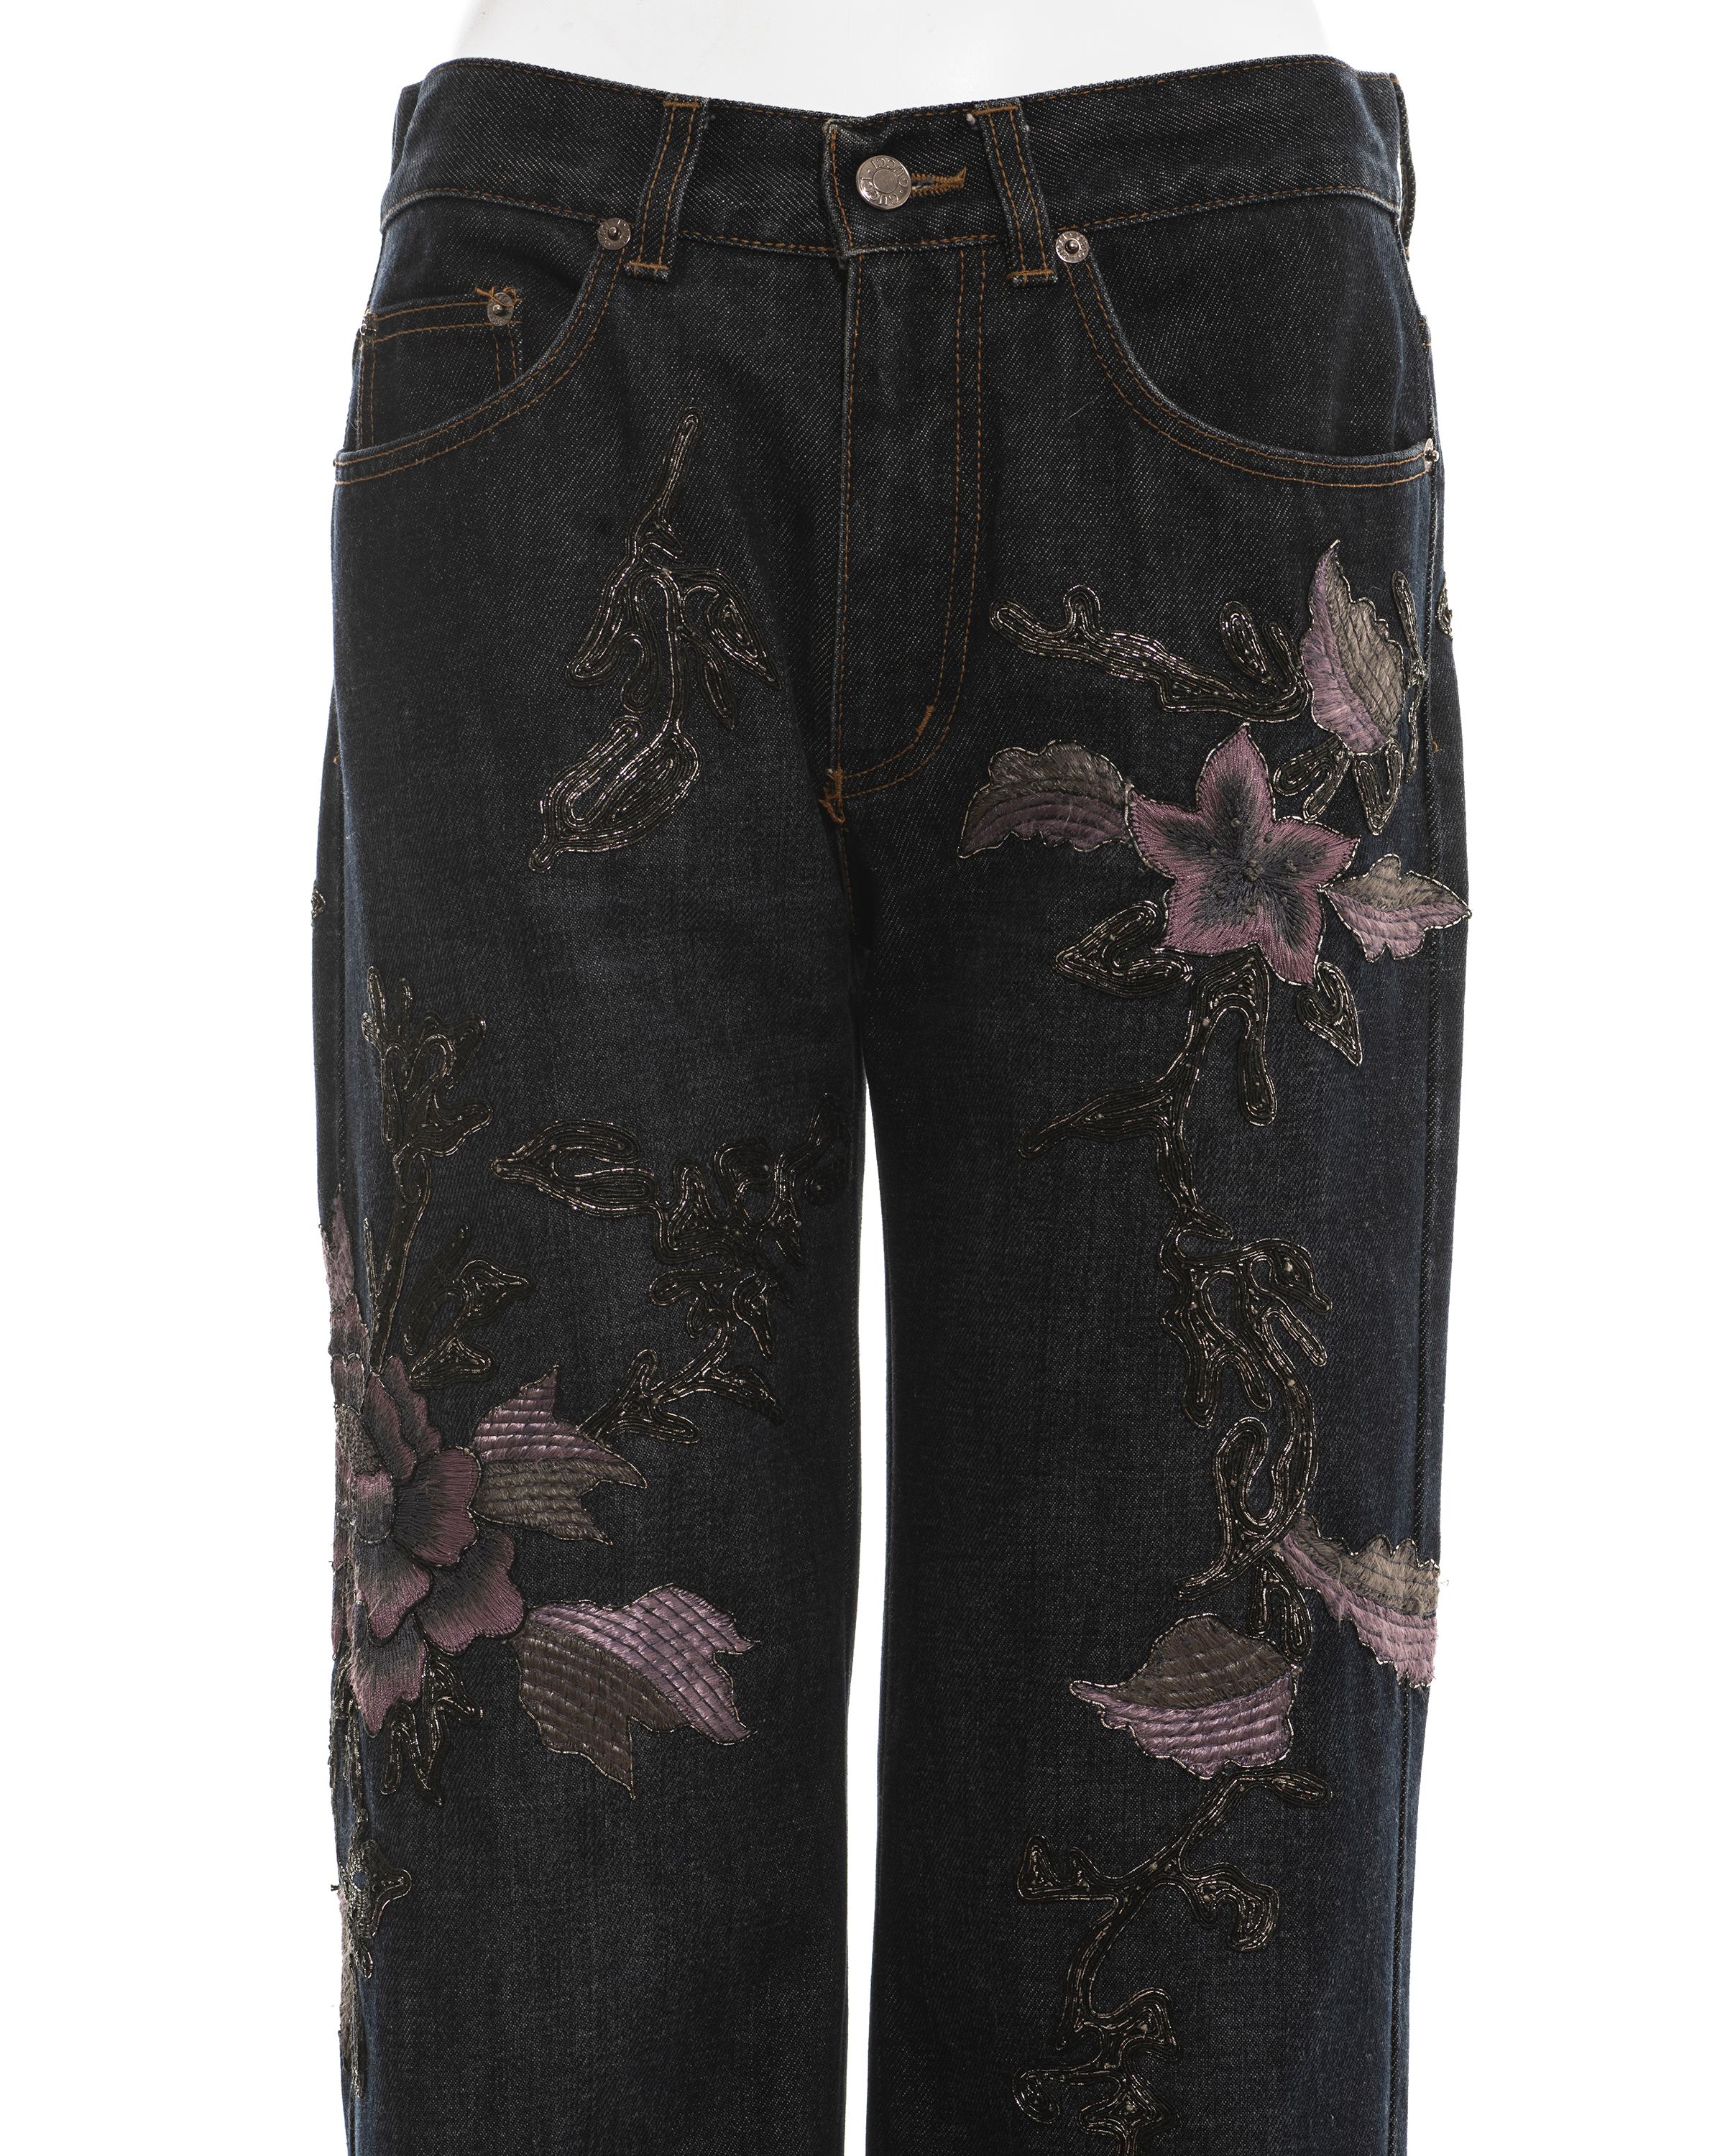 Gucci by Tom Ford denim jeans with floral embroidery

Fall-winter 1999

Measurements:

Waist 28/29